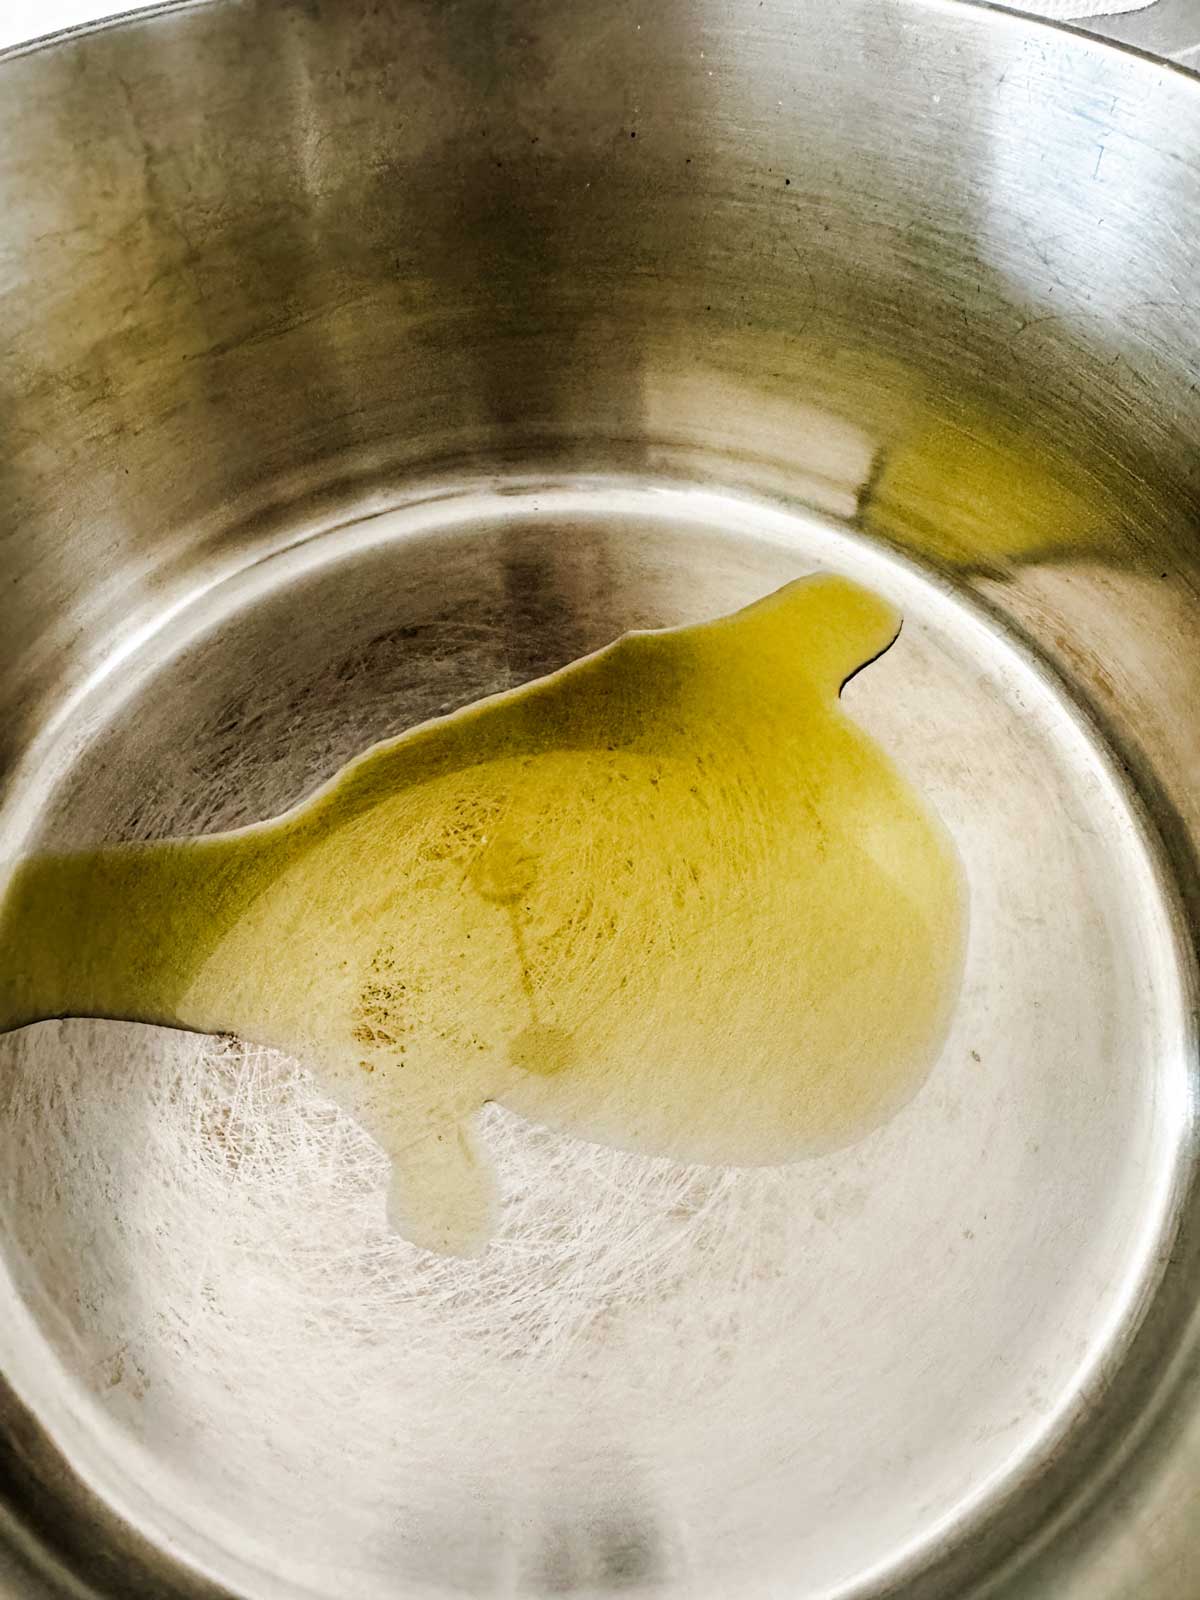 Oil cooking in a saucepan.